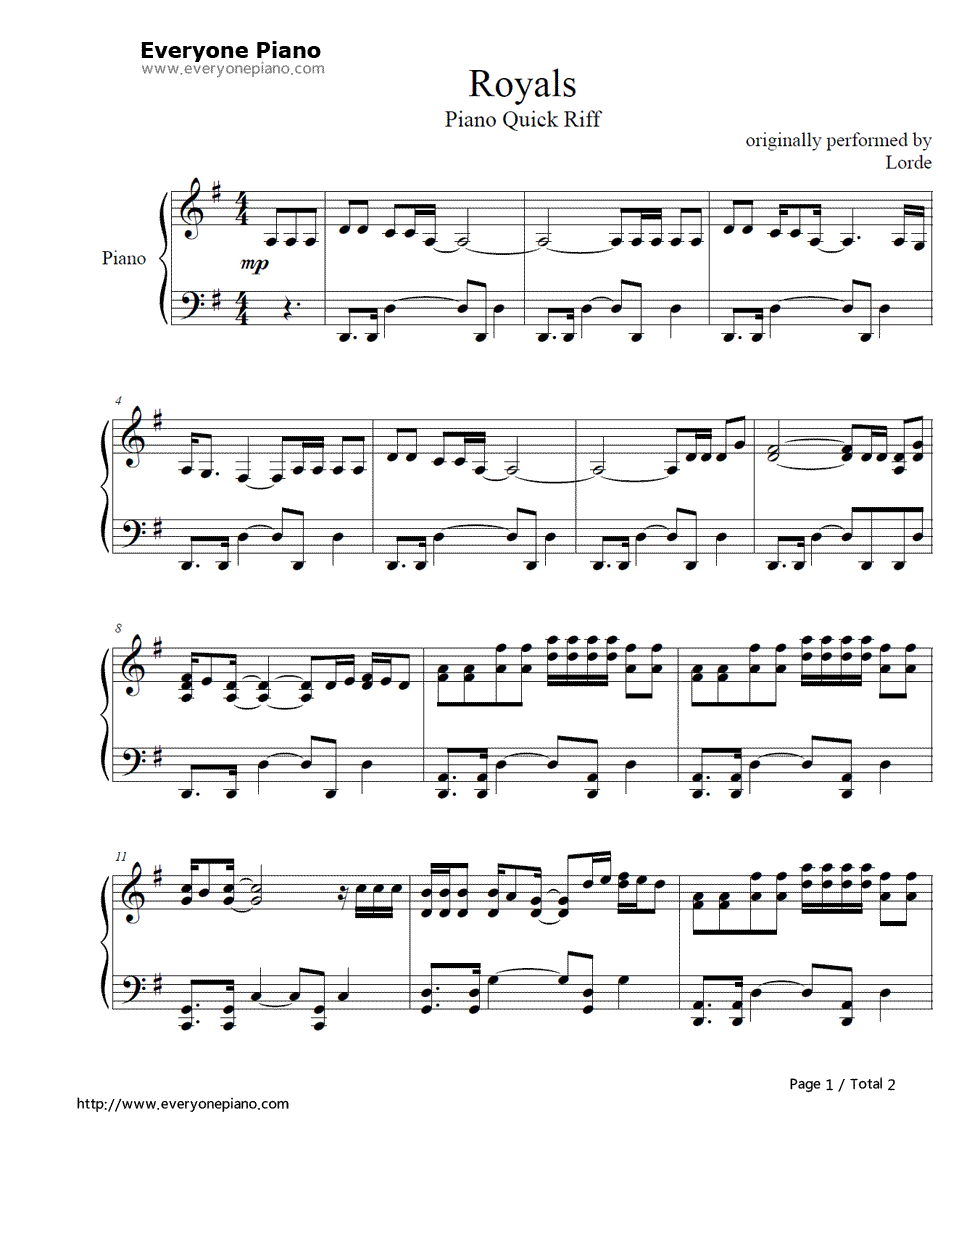 Free Royals (Lorde) Piano Sheet Music. | Flutey | Pinterest | Pop - Free Printable Piano Sheet Music For Popular Songs